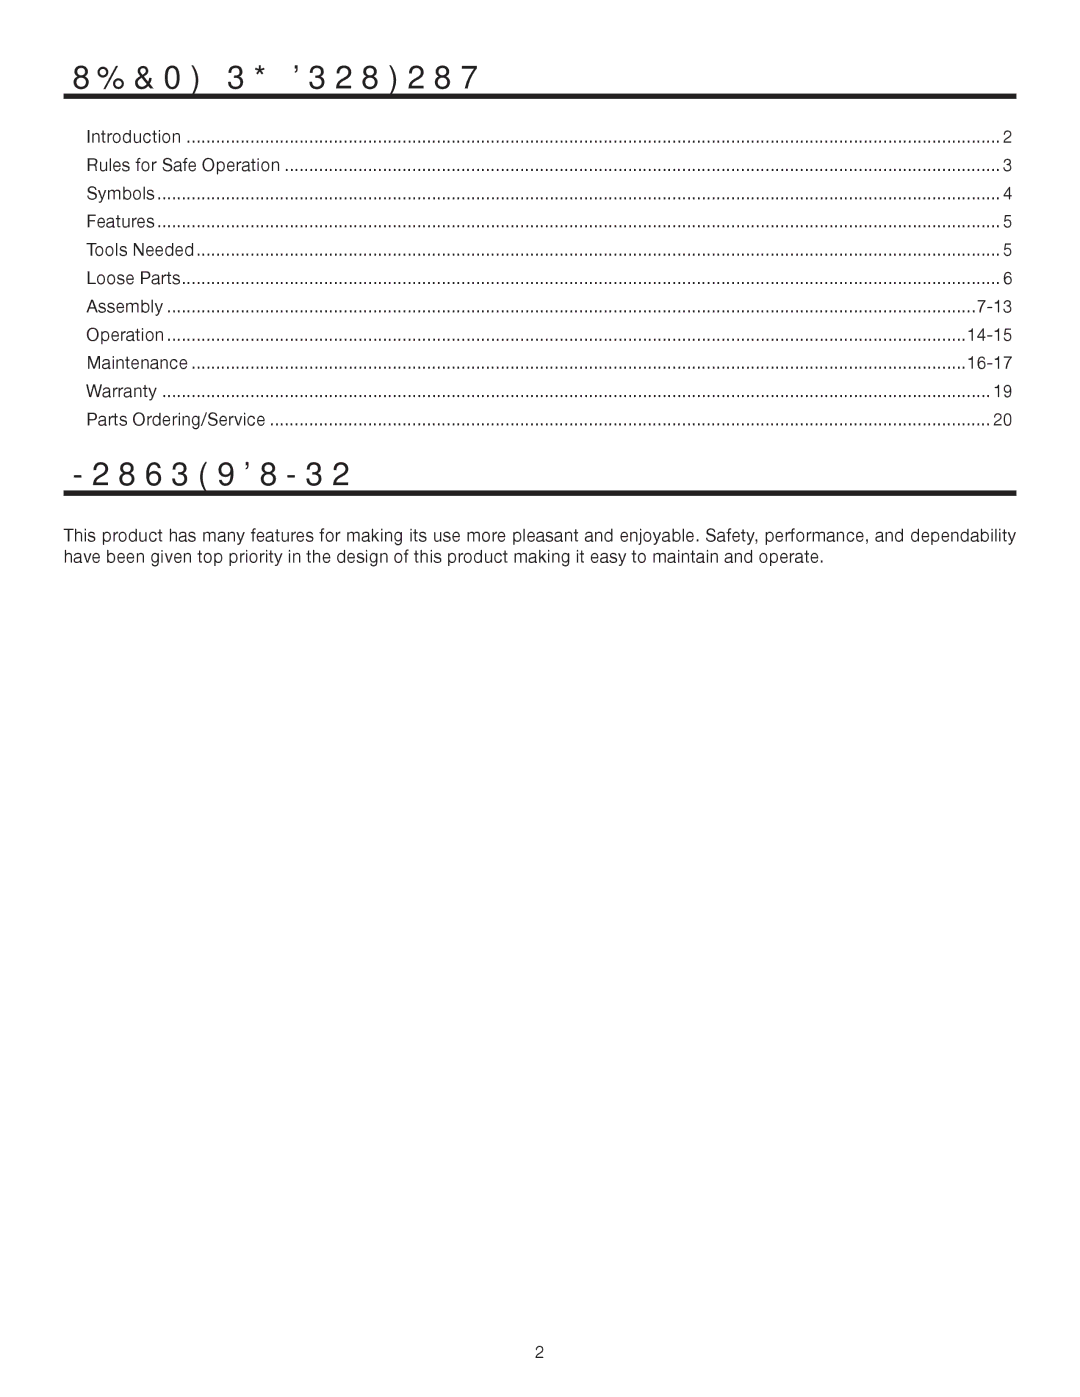 RIDGID AC9944 manual Table of Contents, Introduction 